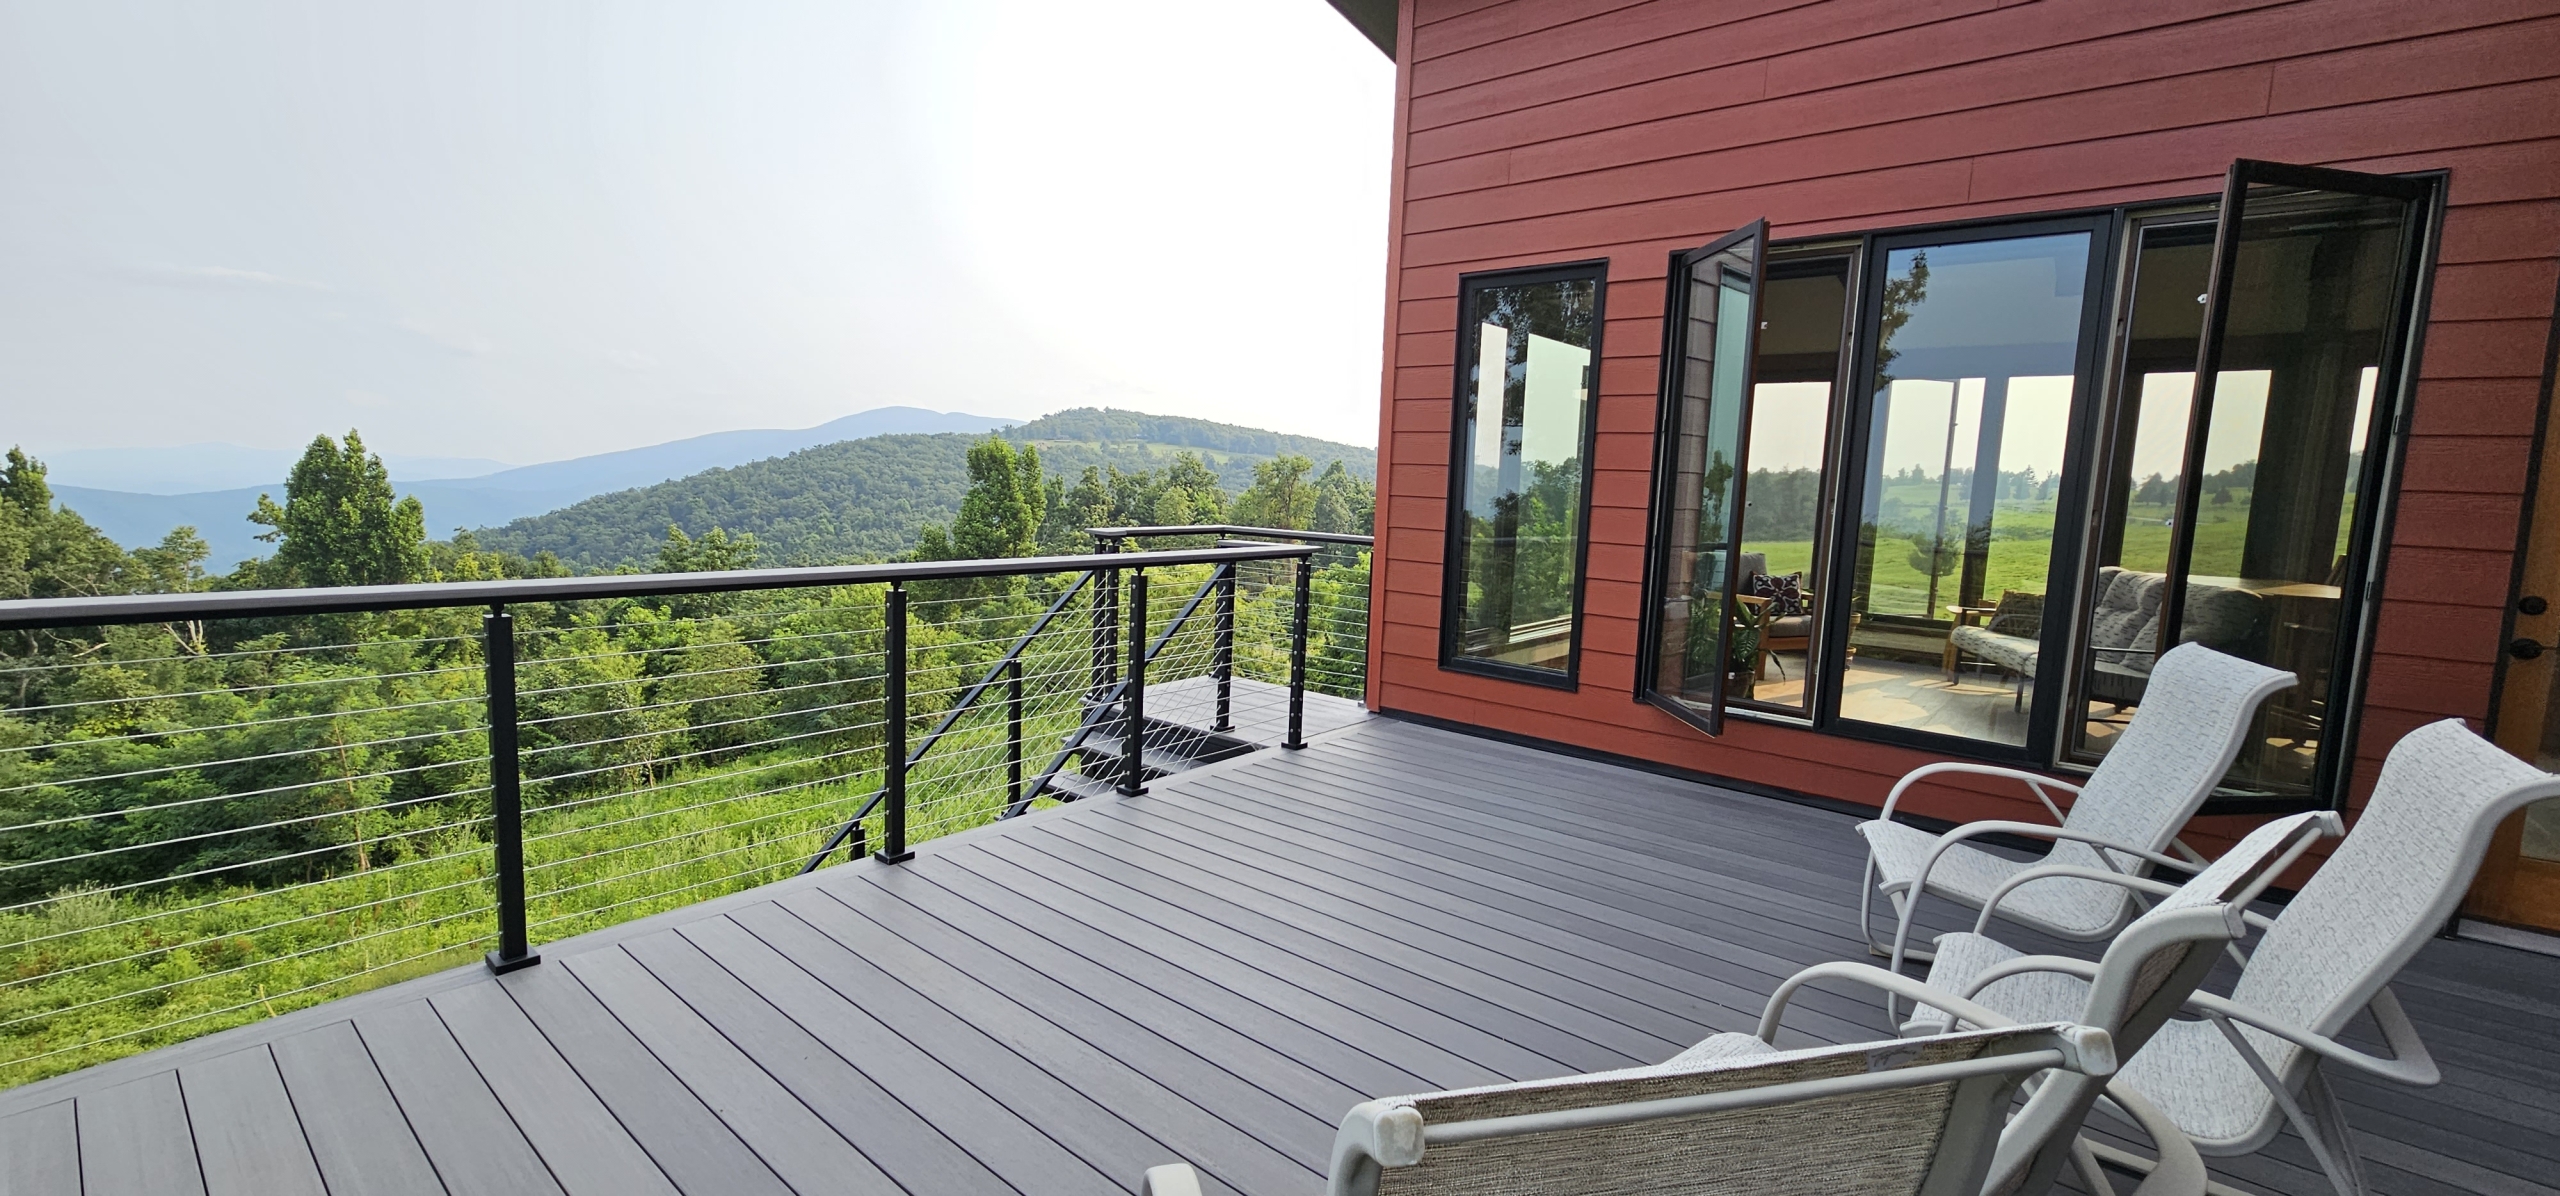 custom home exterior composite deck with view into mountains